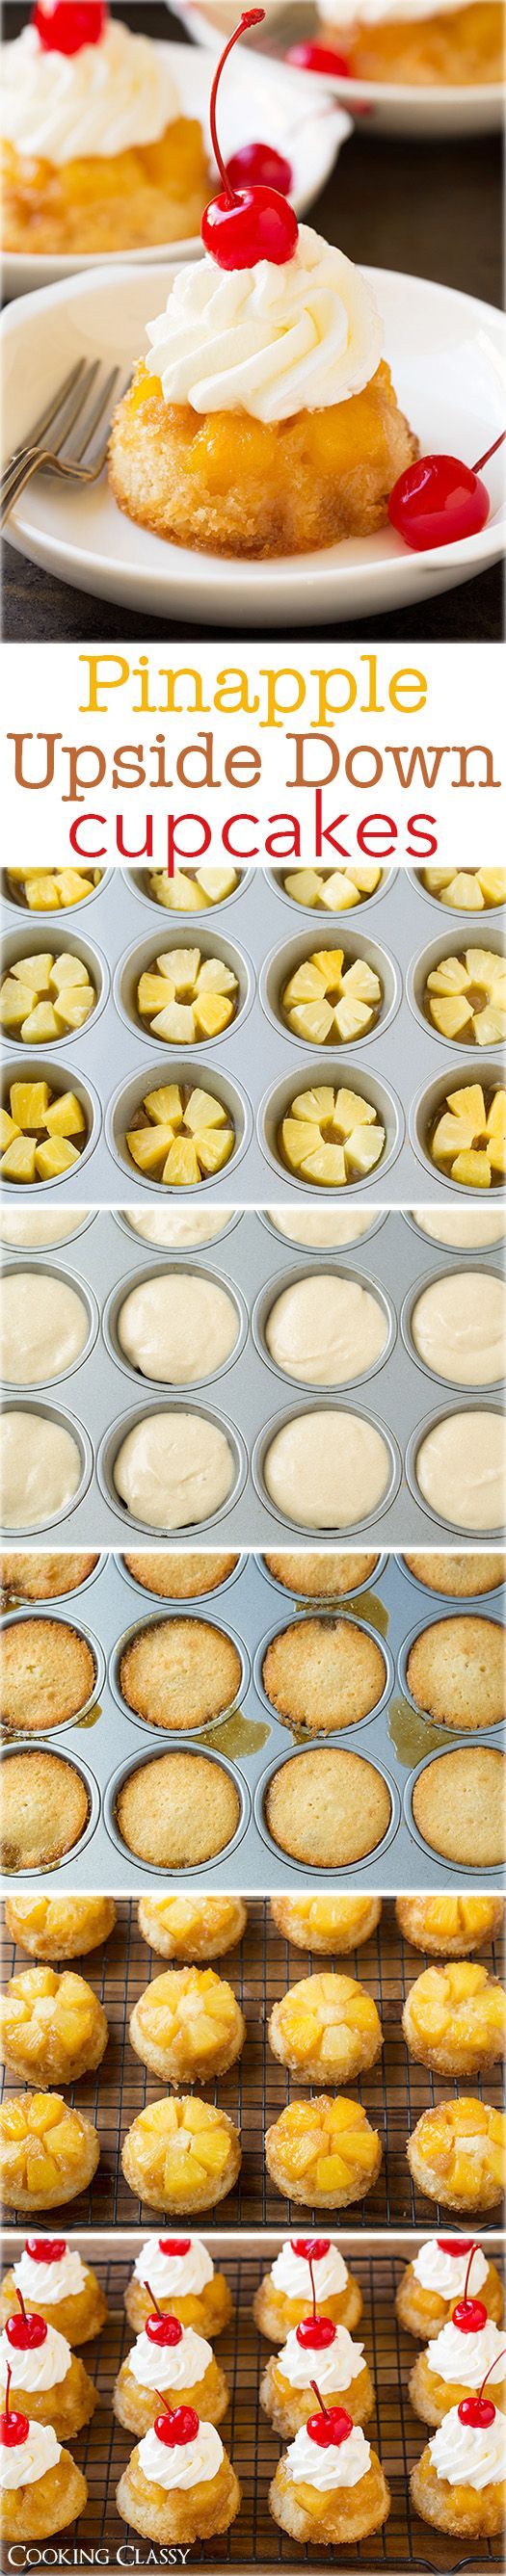 Pineapple Upside Down Cupcakes – I’ve already made these twice and I’m making them again tomorrow for company! Just like that